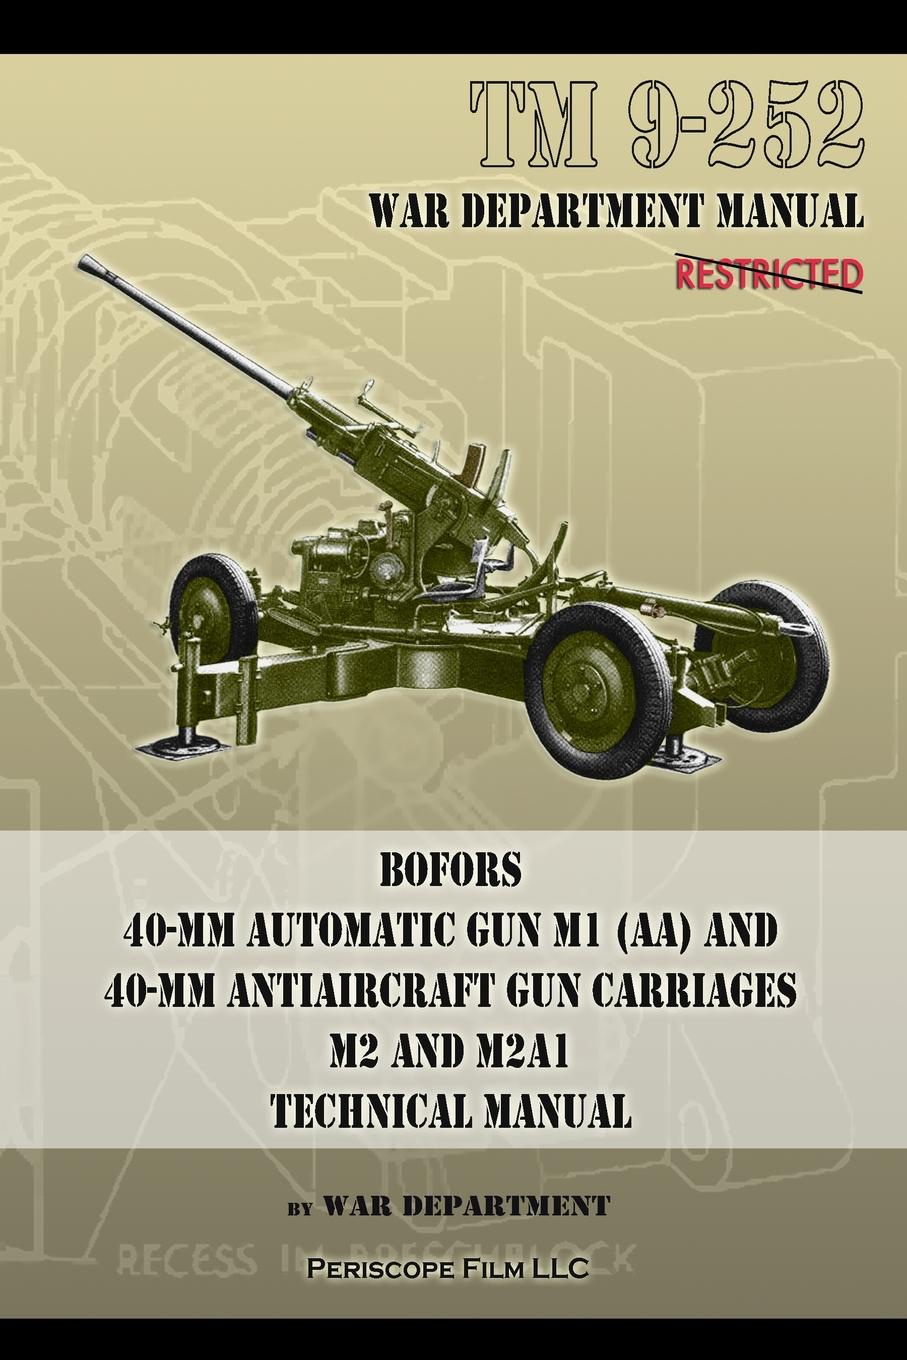 TM 9-252 Bofors 40-mm Automatic Gun M1 (AA) and 40-mm Antiaircraft Gun Carriages. M2 and M2A1 Technical Manual